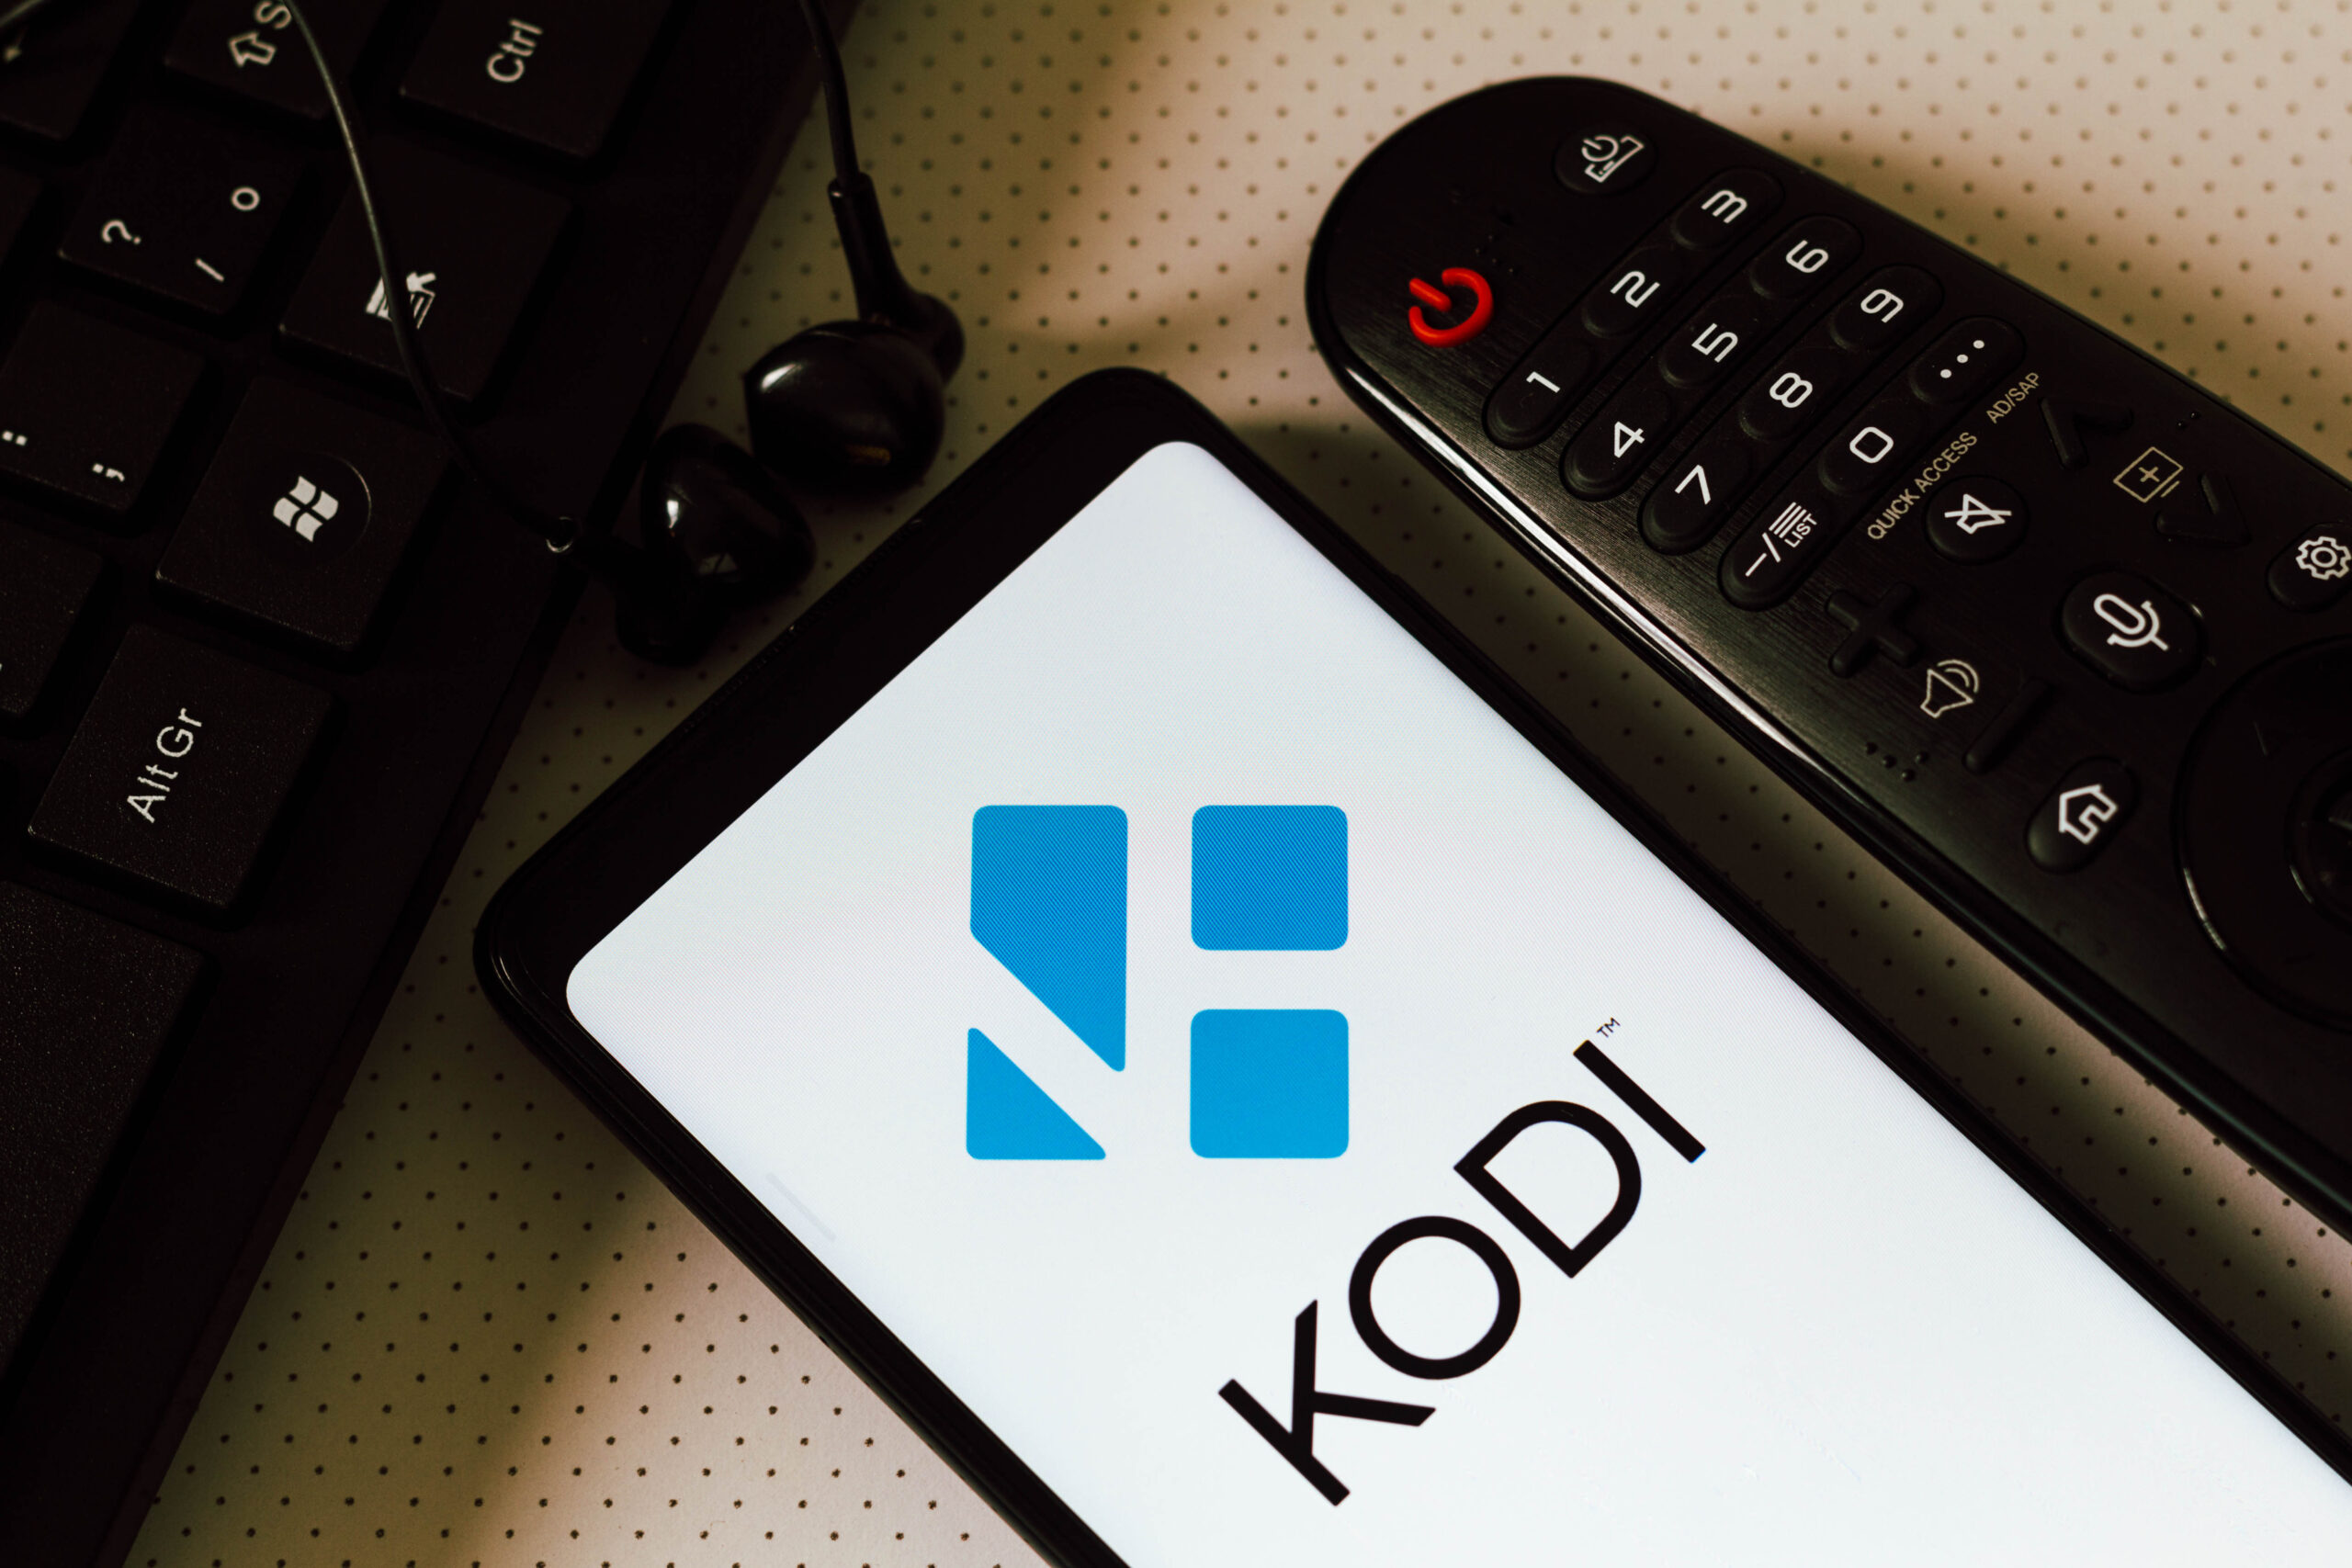 How to Change Background in Kodi